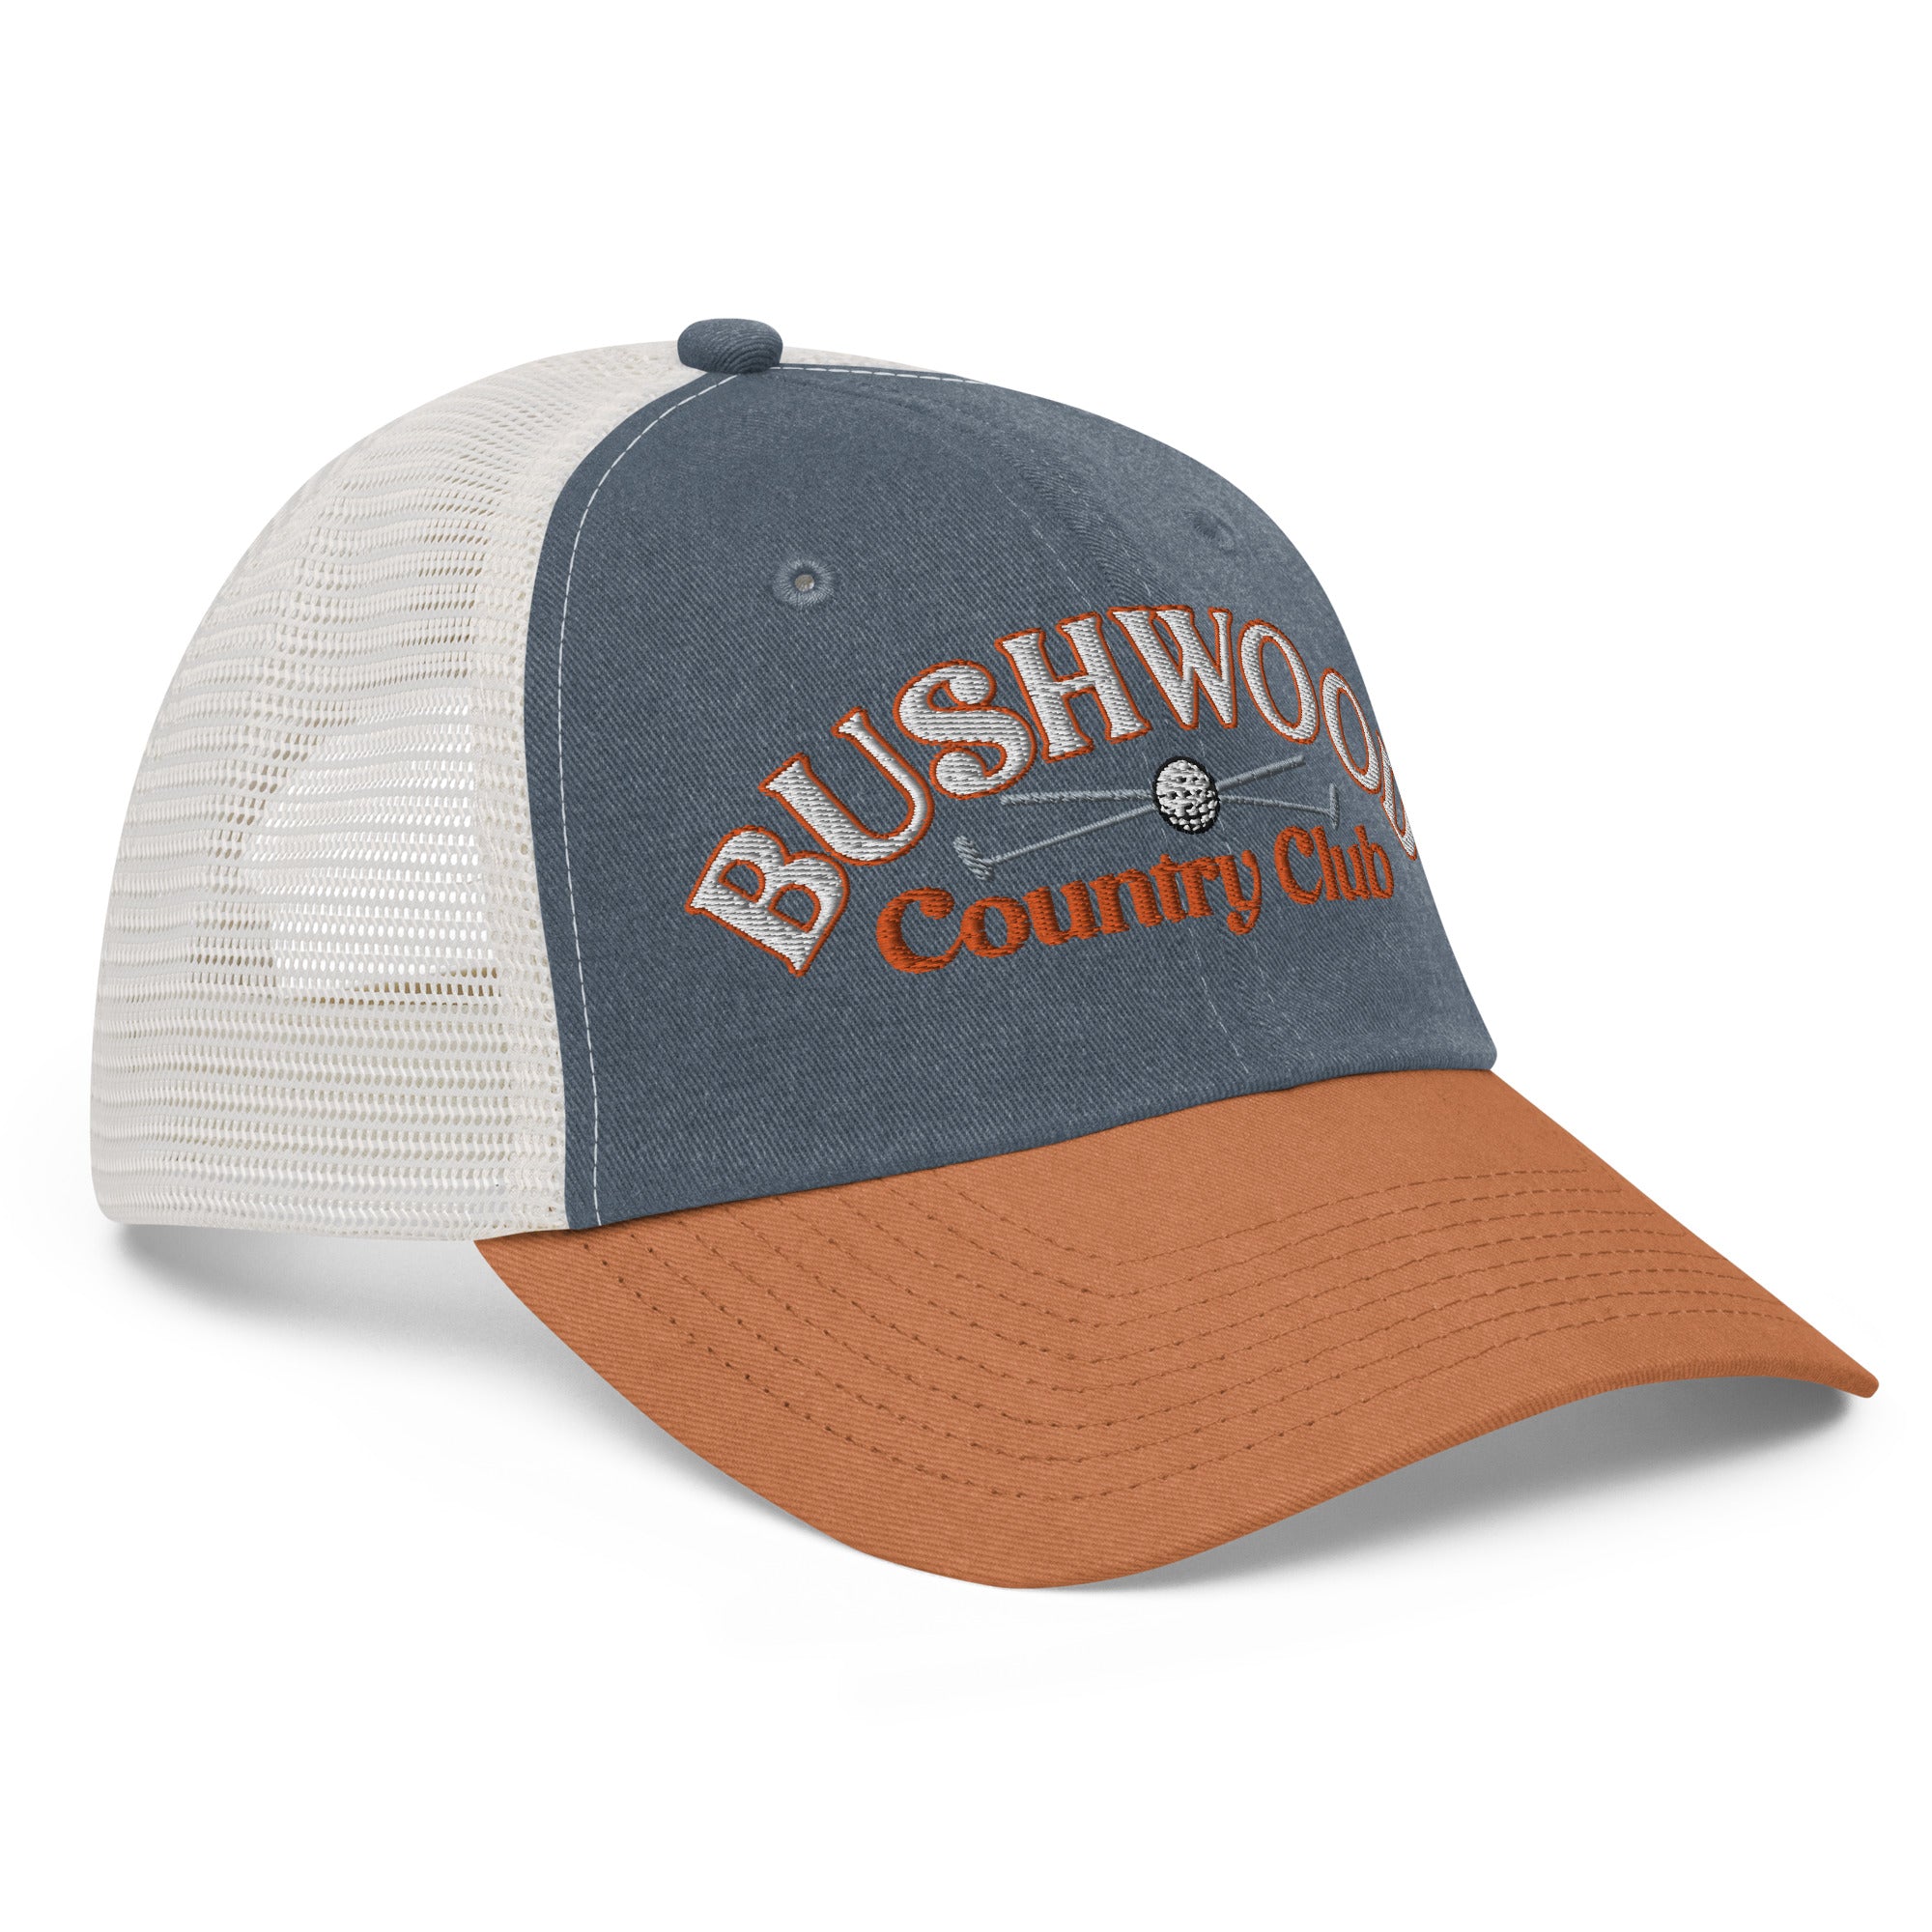 Bushwood Country Club Pigment-dyed Golf Hat